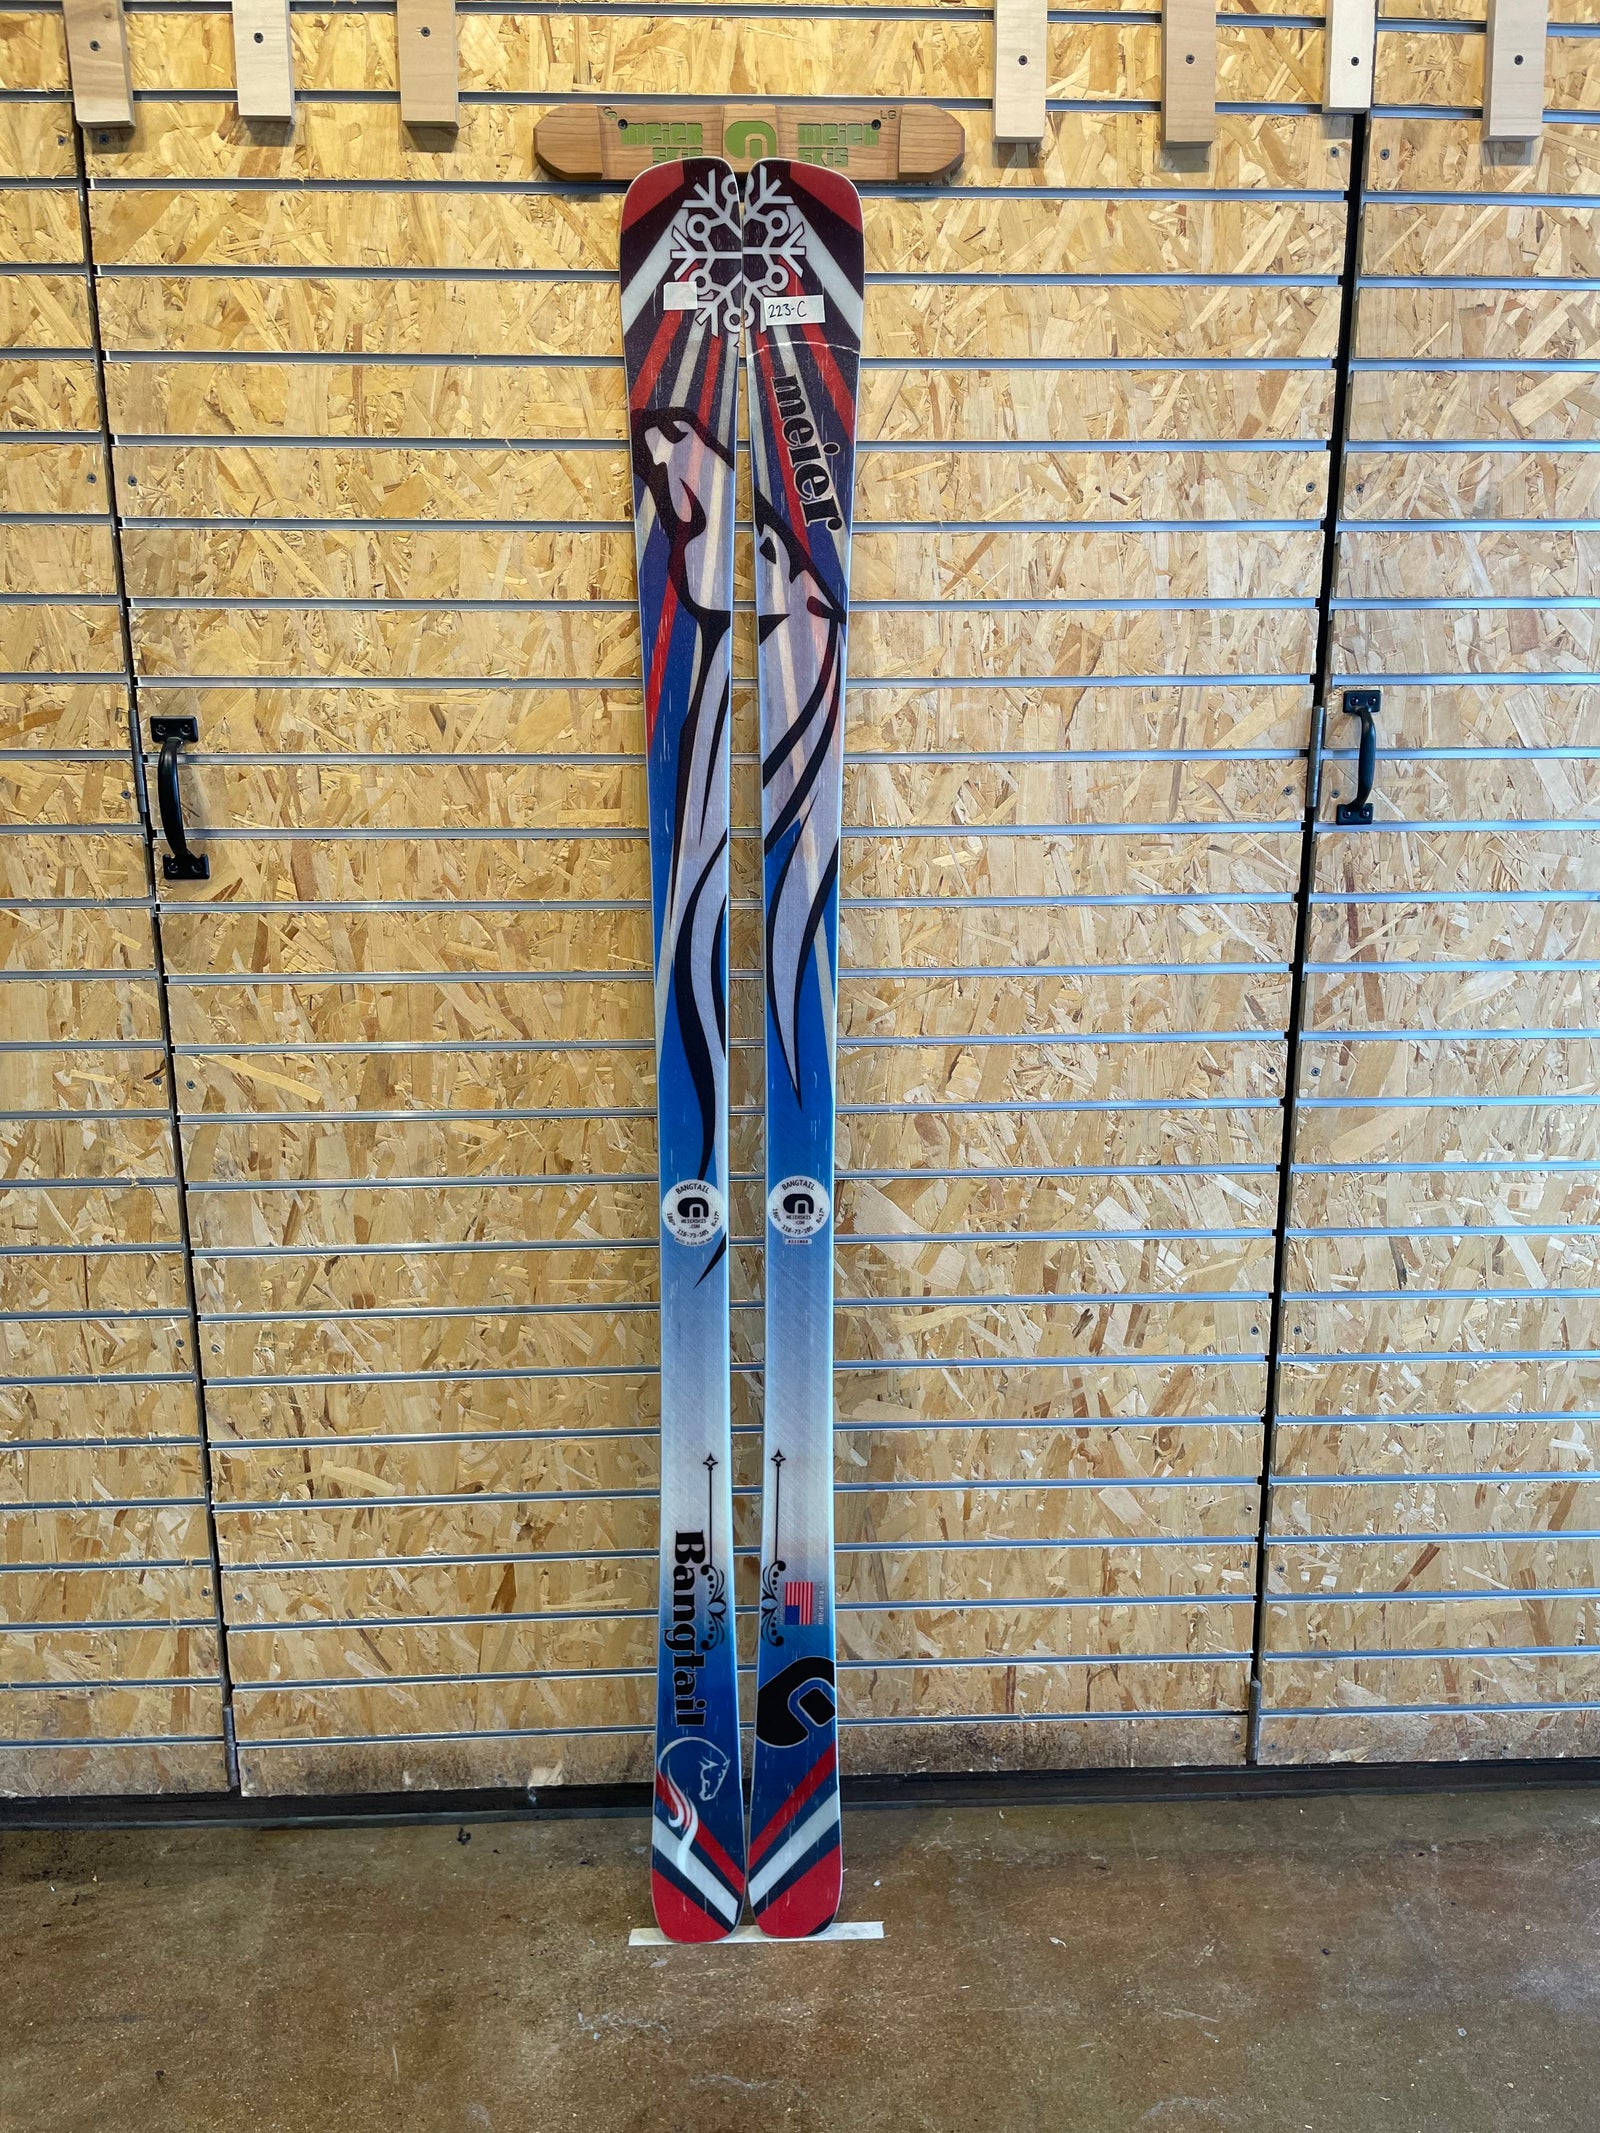 Products - Meier Skis